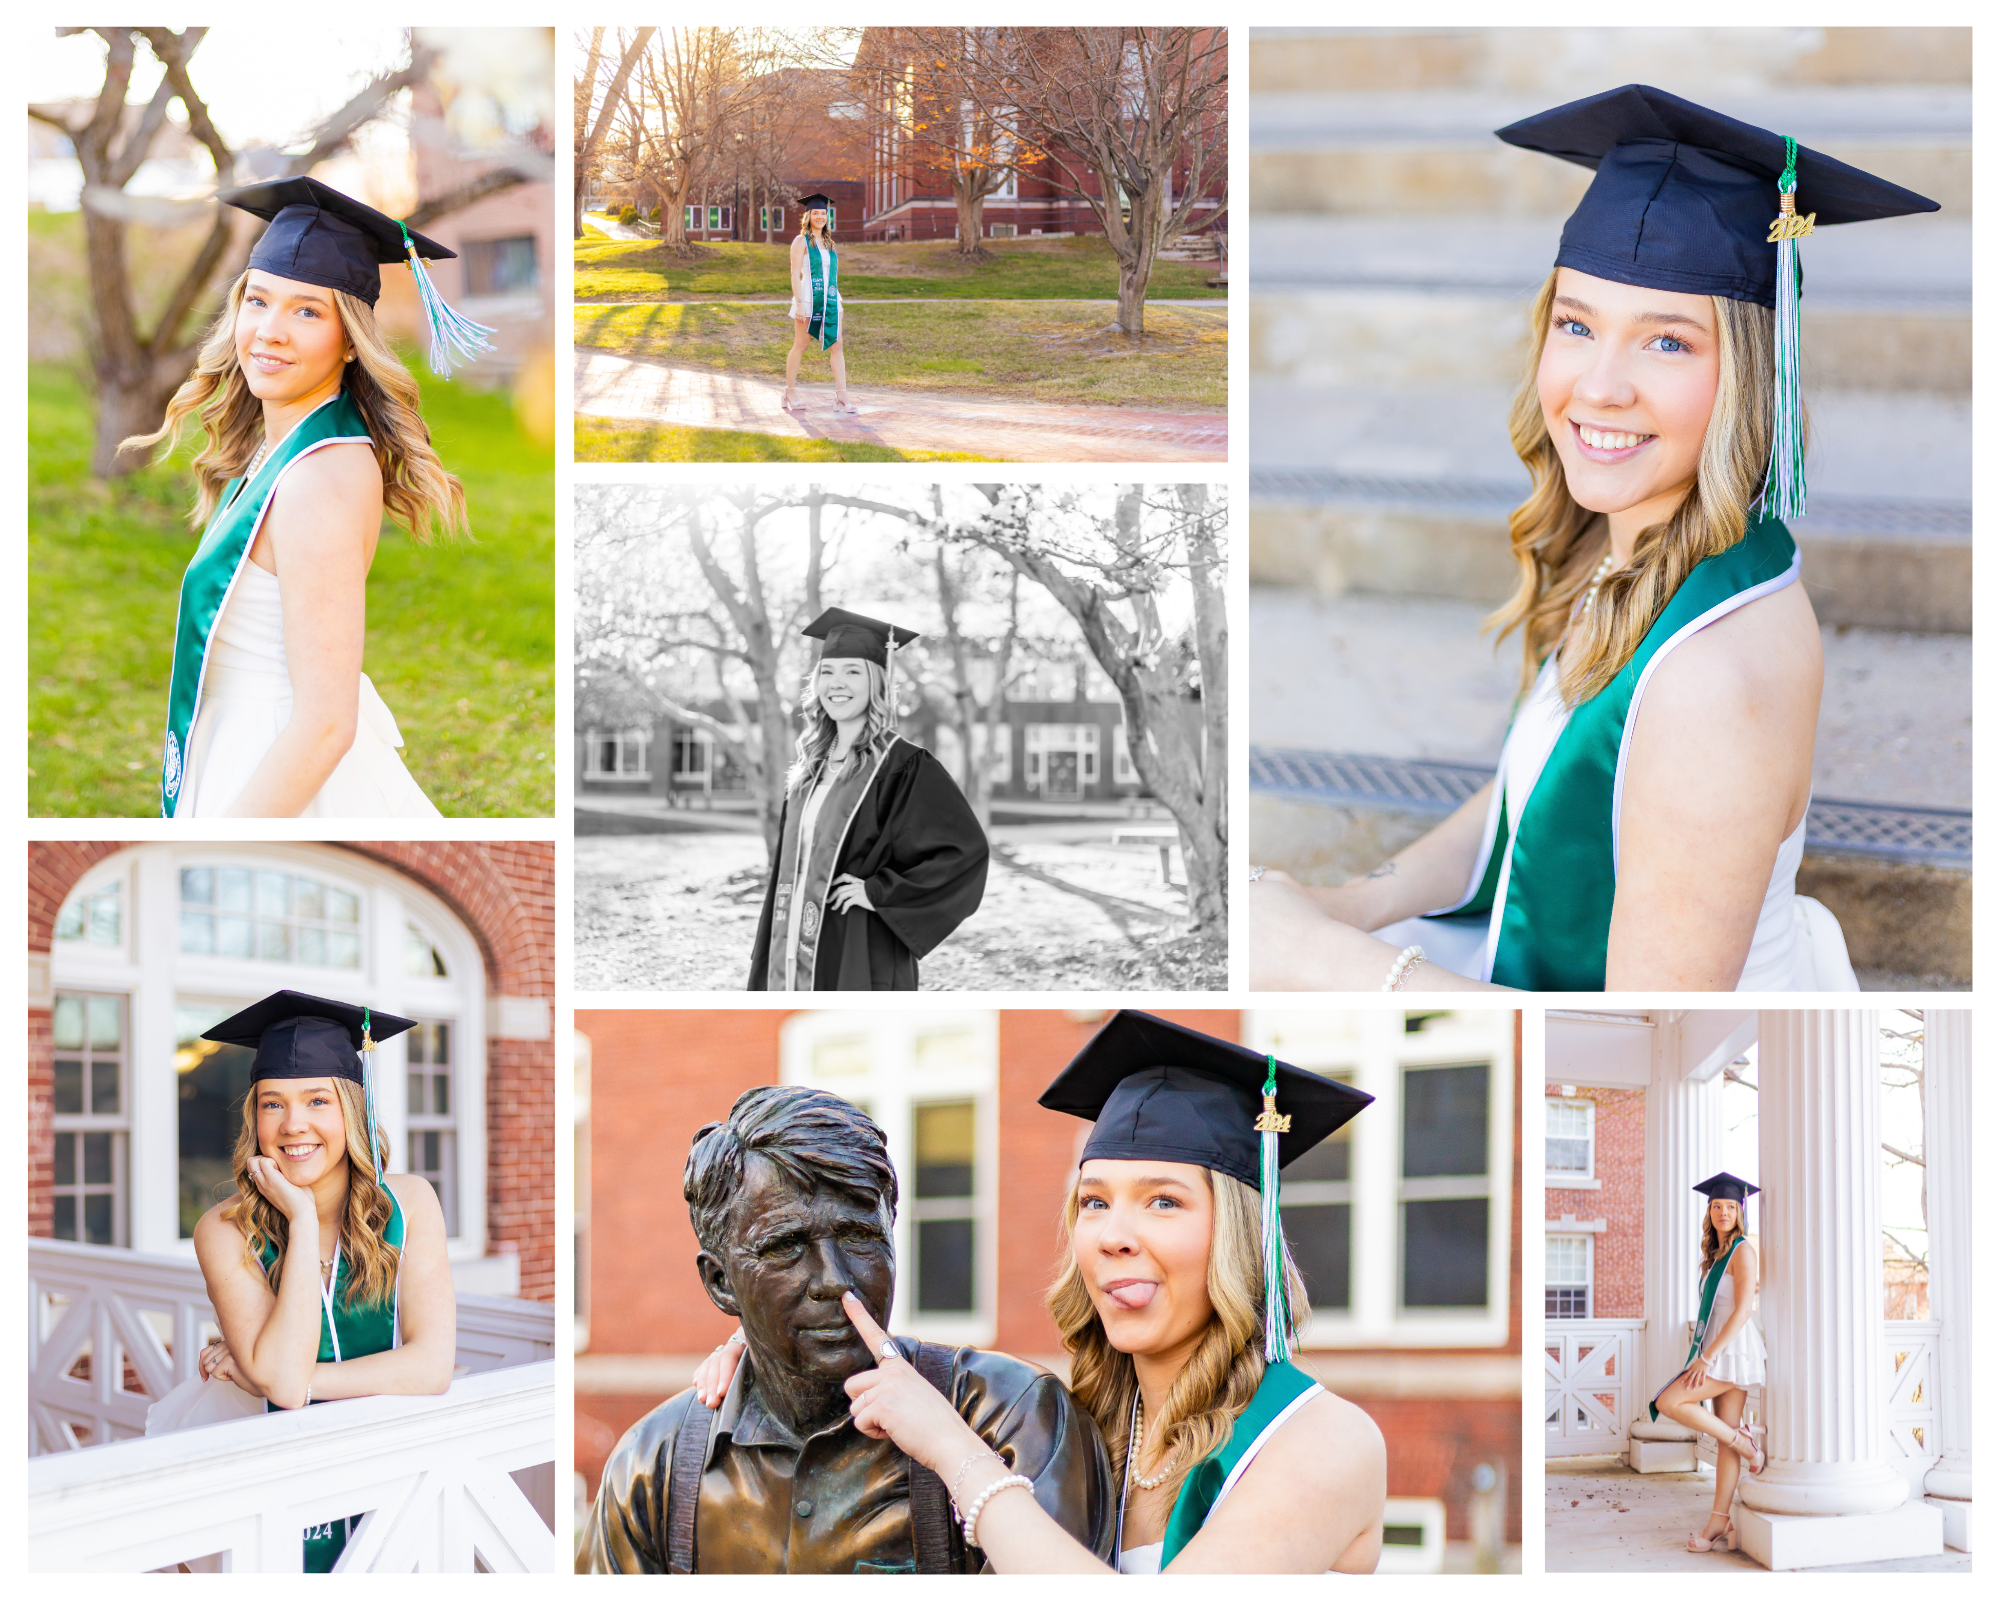 Grad photos at Plymouth State University at golden hour.